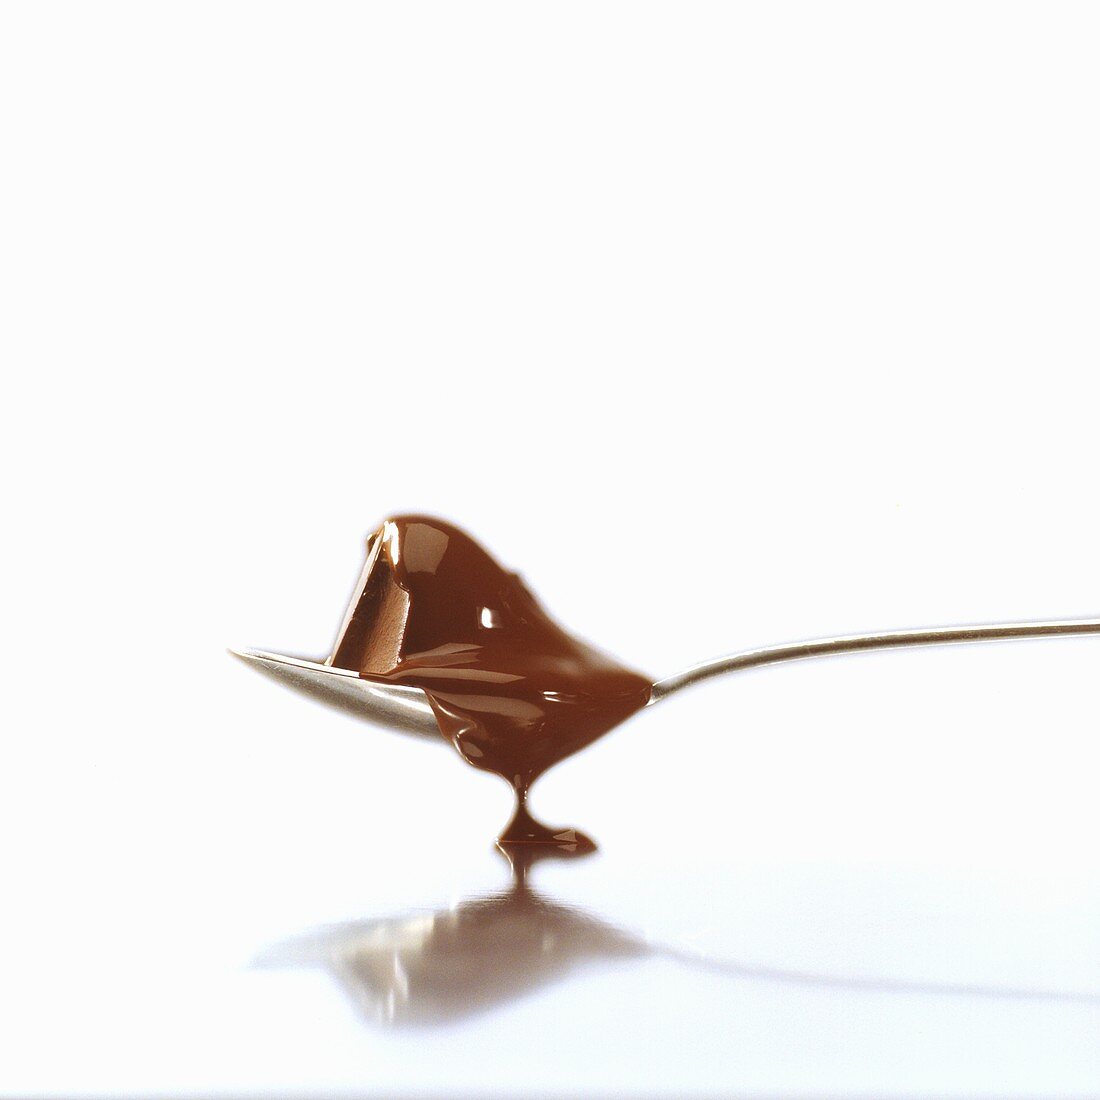 Melting chocolate running from spoon